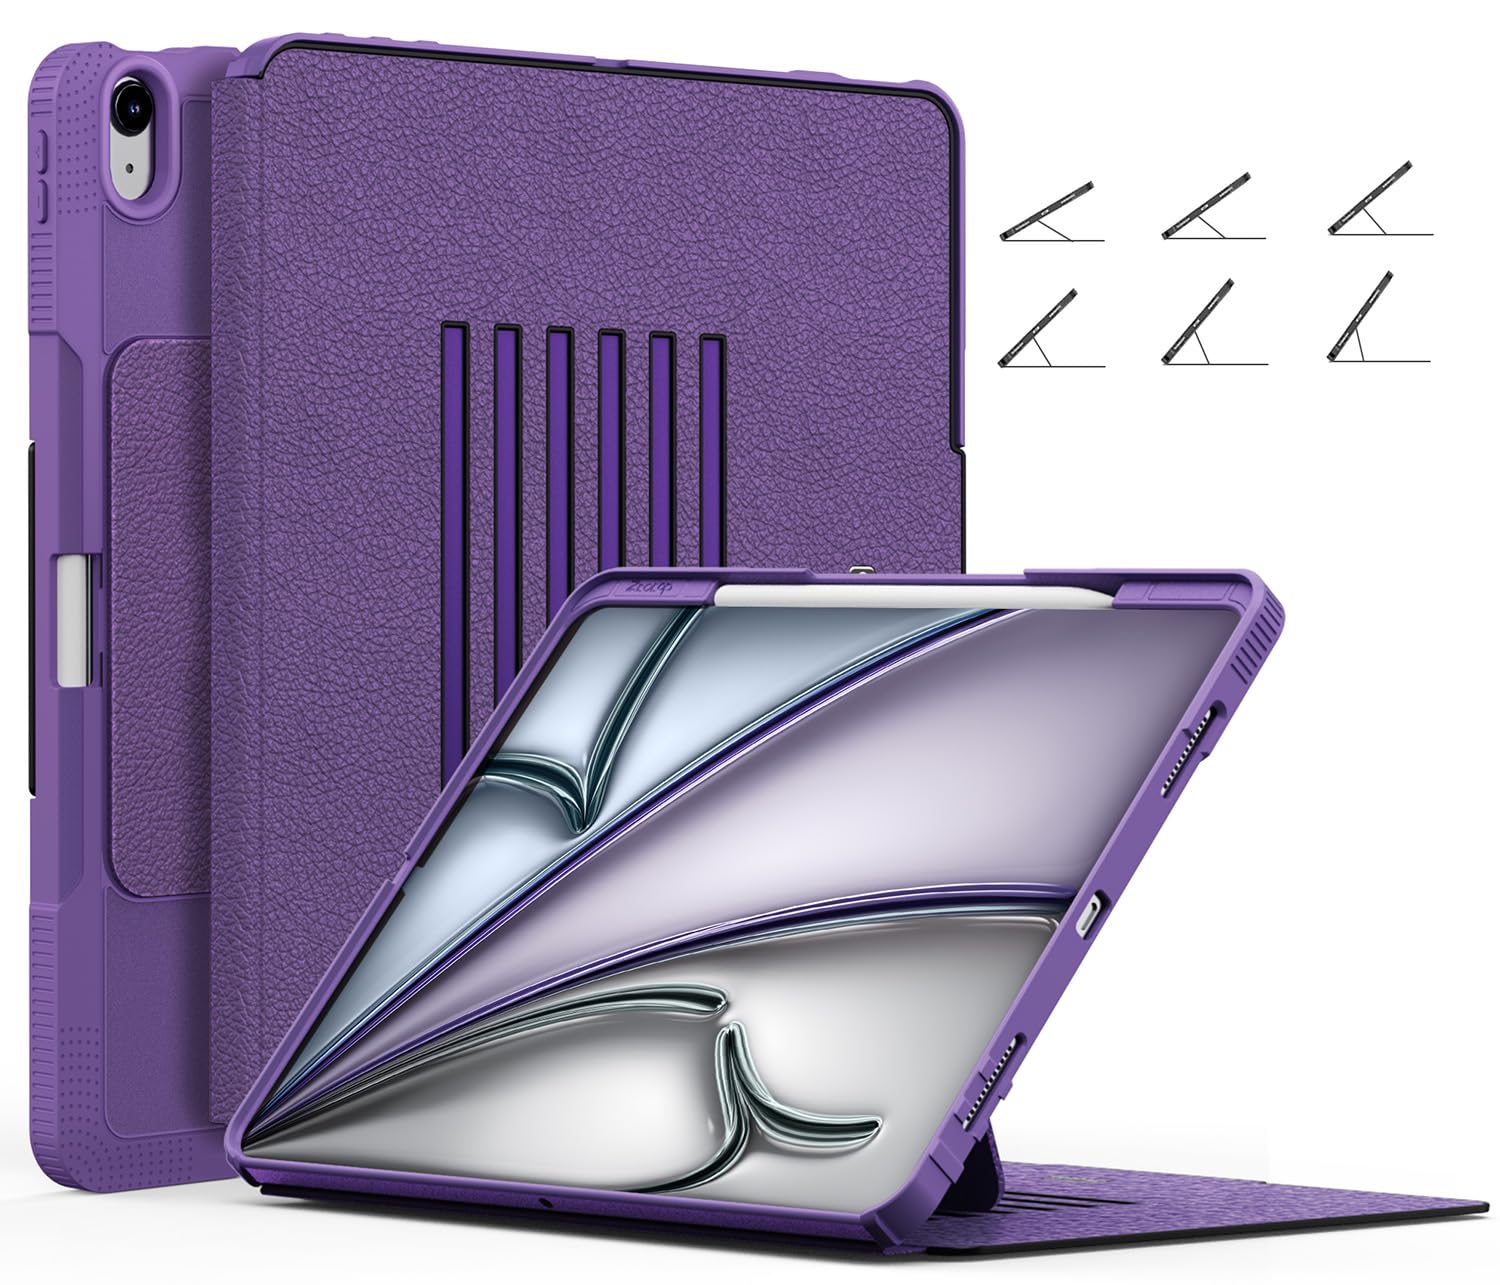 ZtotopCases for New iPad Air 13 Inch Case 2024 / iPad Pro 12.9 Inch Case 3rd Generation 2018, Magnetic Stand & Sleep/Wake Cover - Apple Pencil Charging, Full Protective Cover for iPad Air 13”, Purple